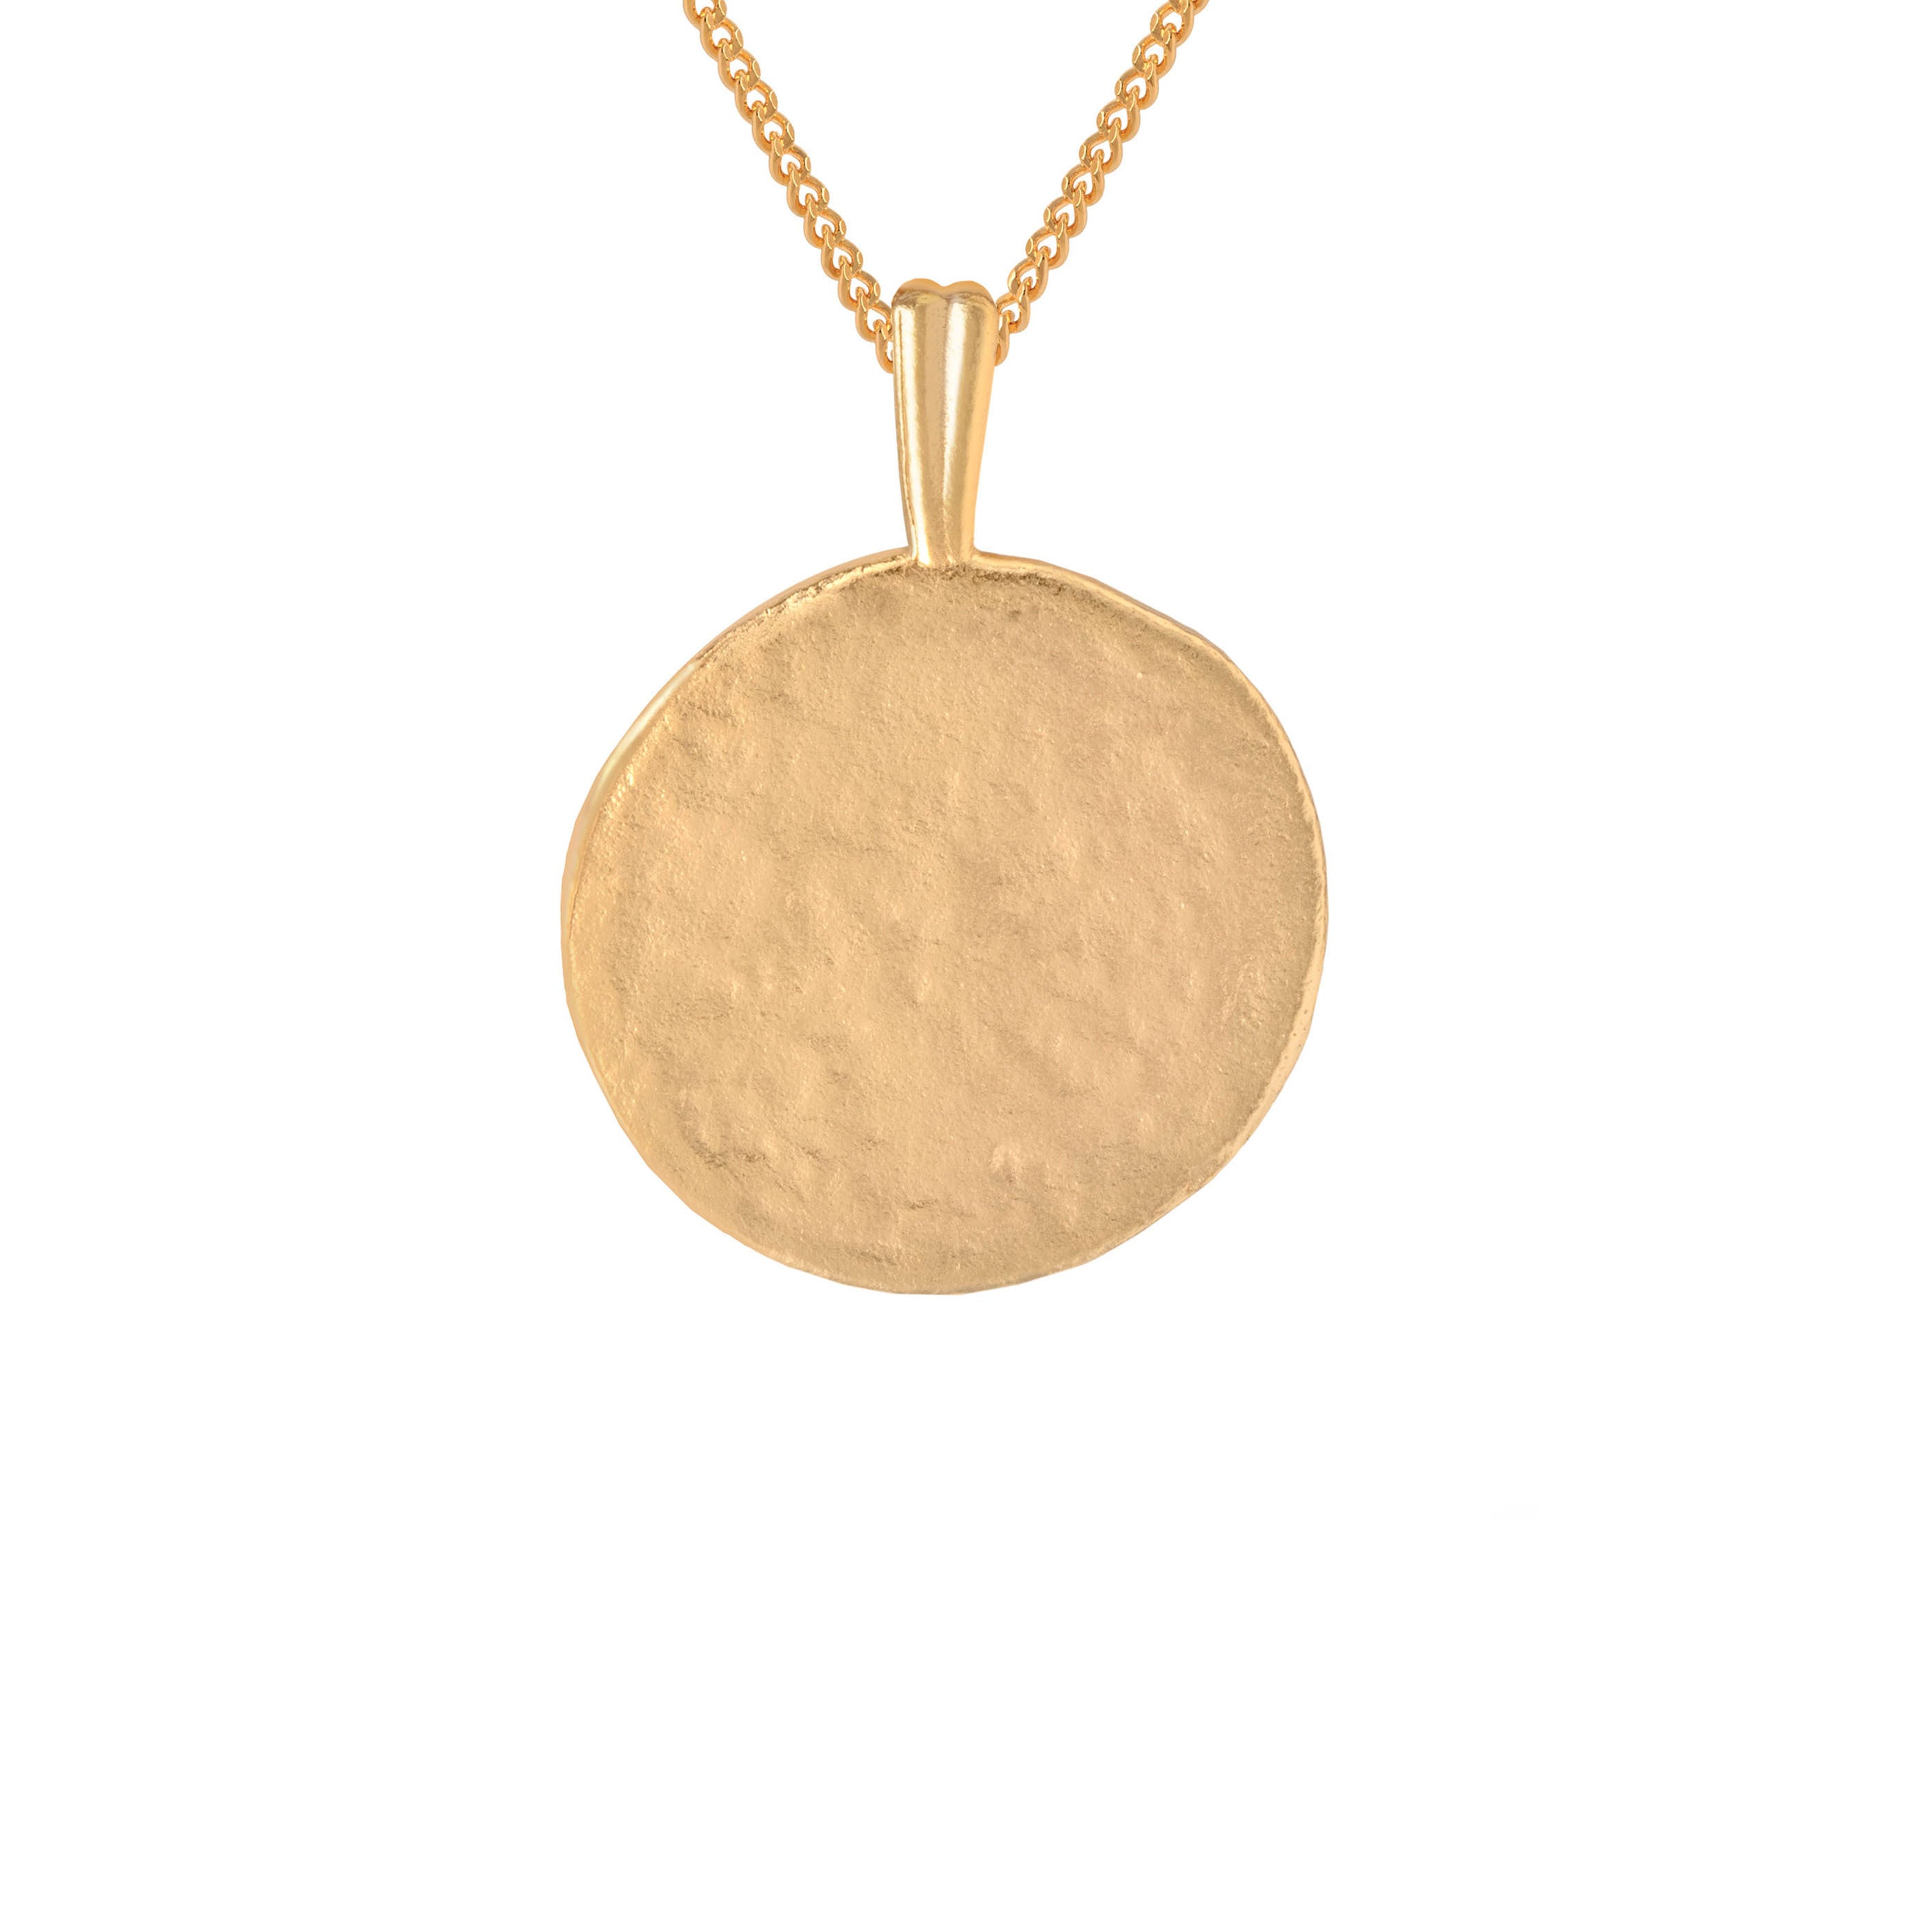 Aries Zodiac Pendant Necklace in Gold back of pendant